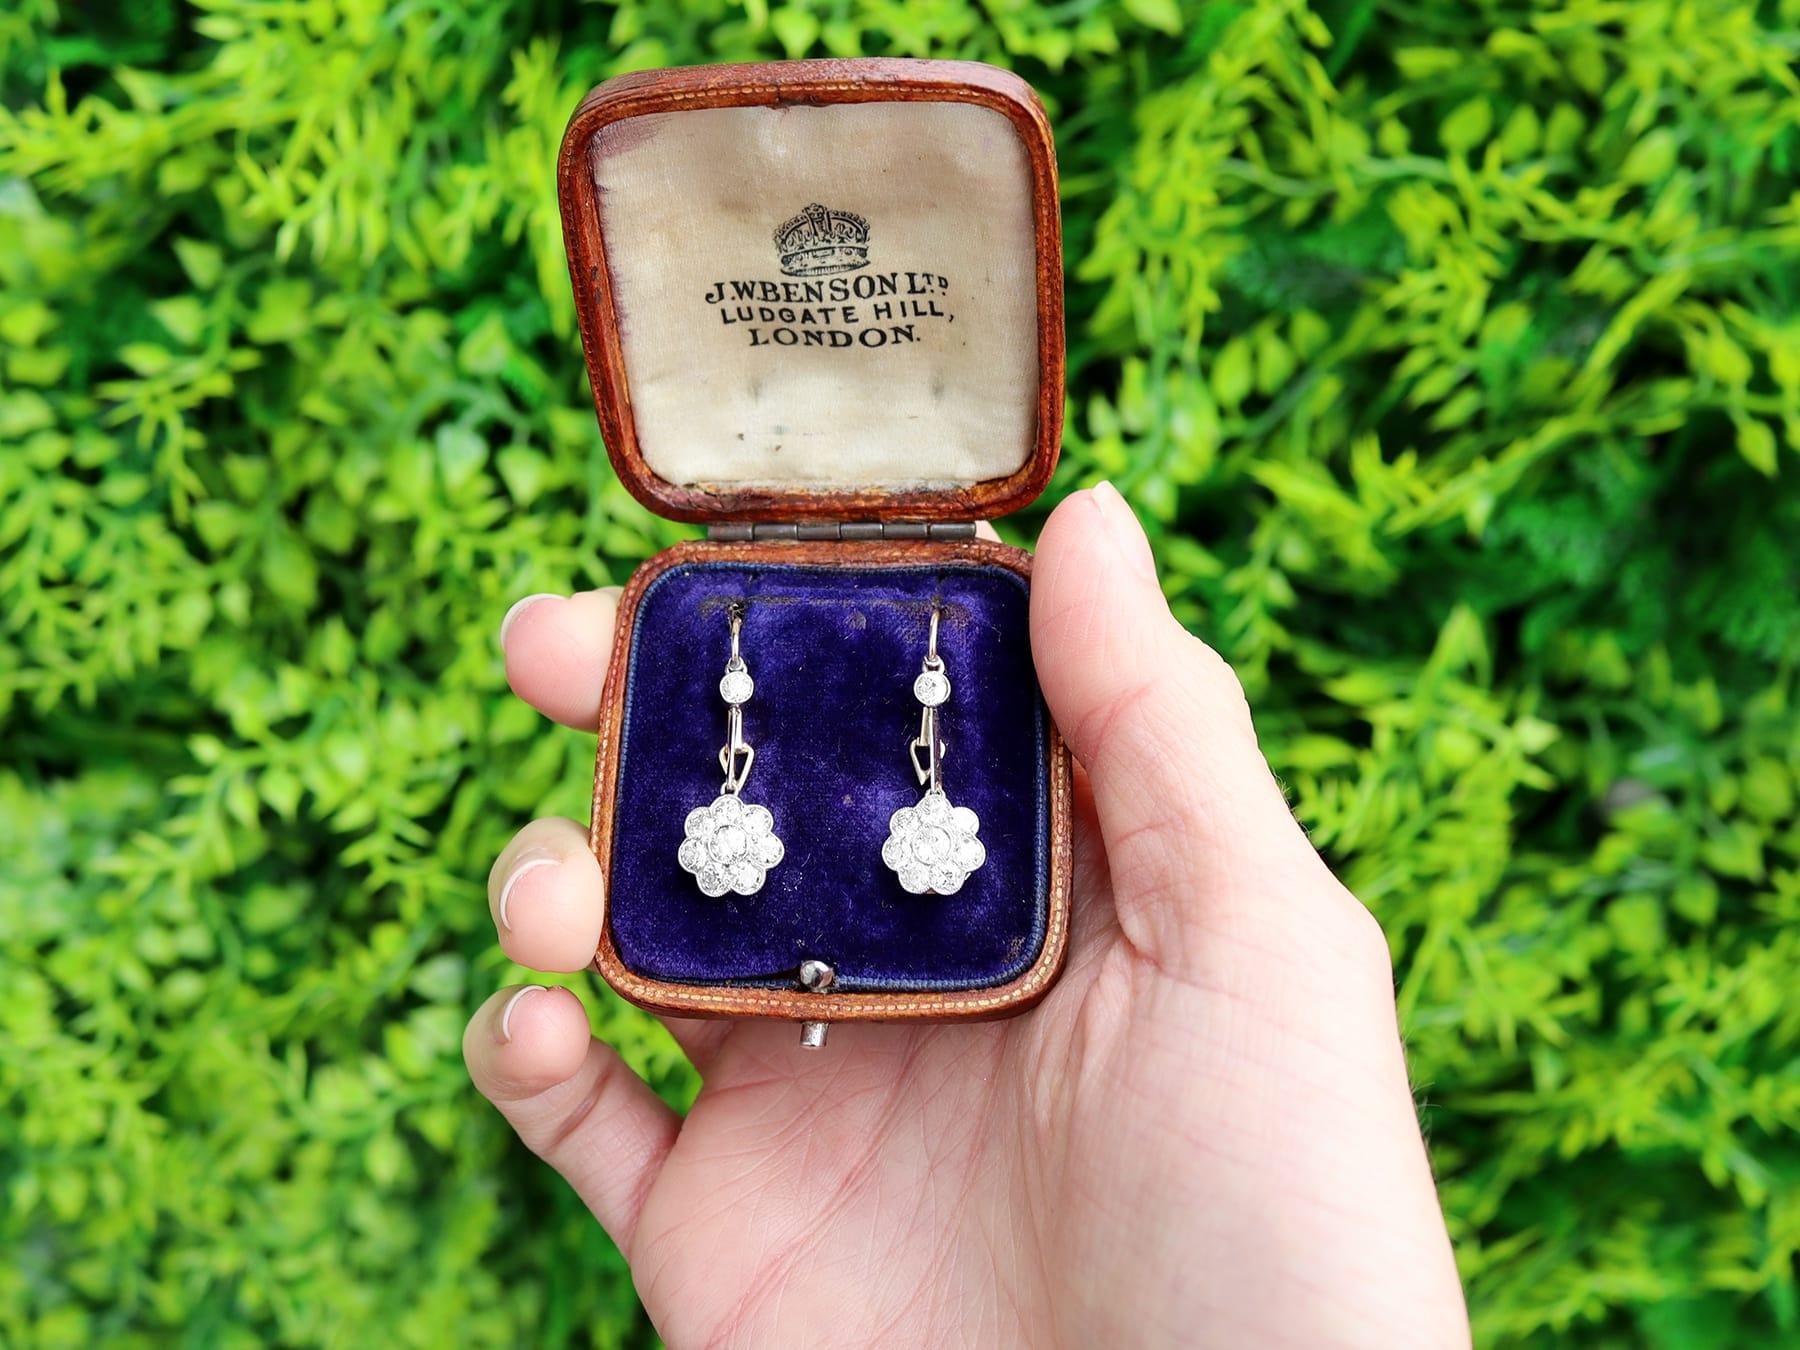 A stunning, fine and impressive pair of antique 2.75 carat diamond, 15 karat yellow gold, platinum set drop earrings; part of our antique jewelry and estate jewelry collections

These stunning, fine and impressive diamond drop earrings are crafted